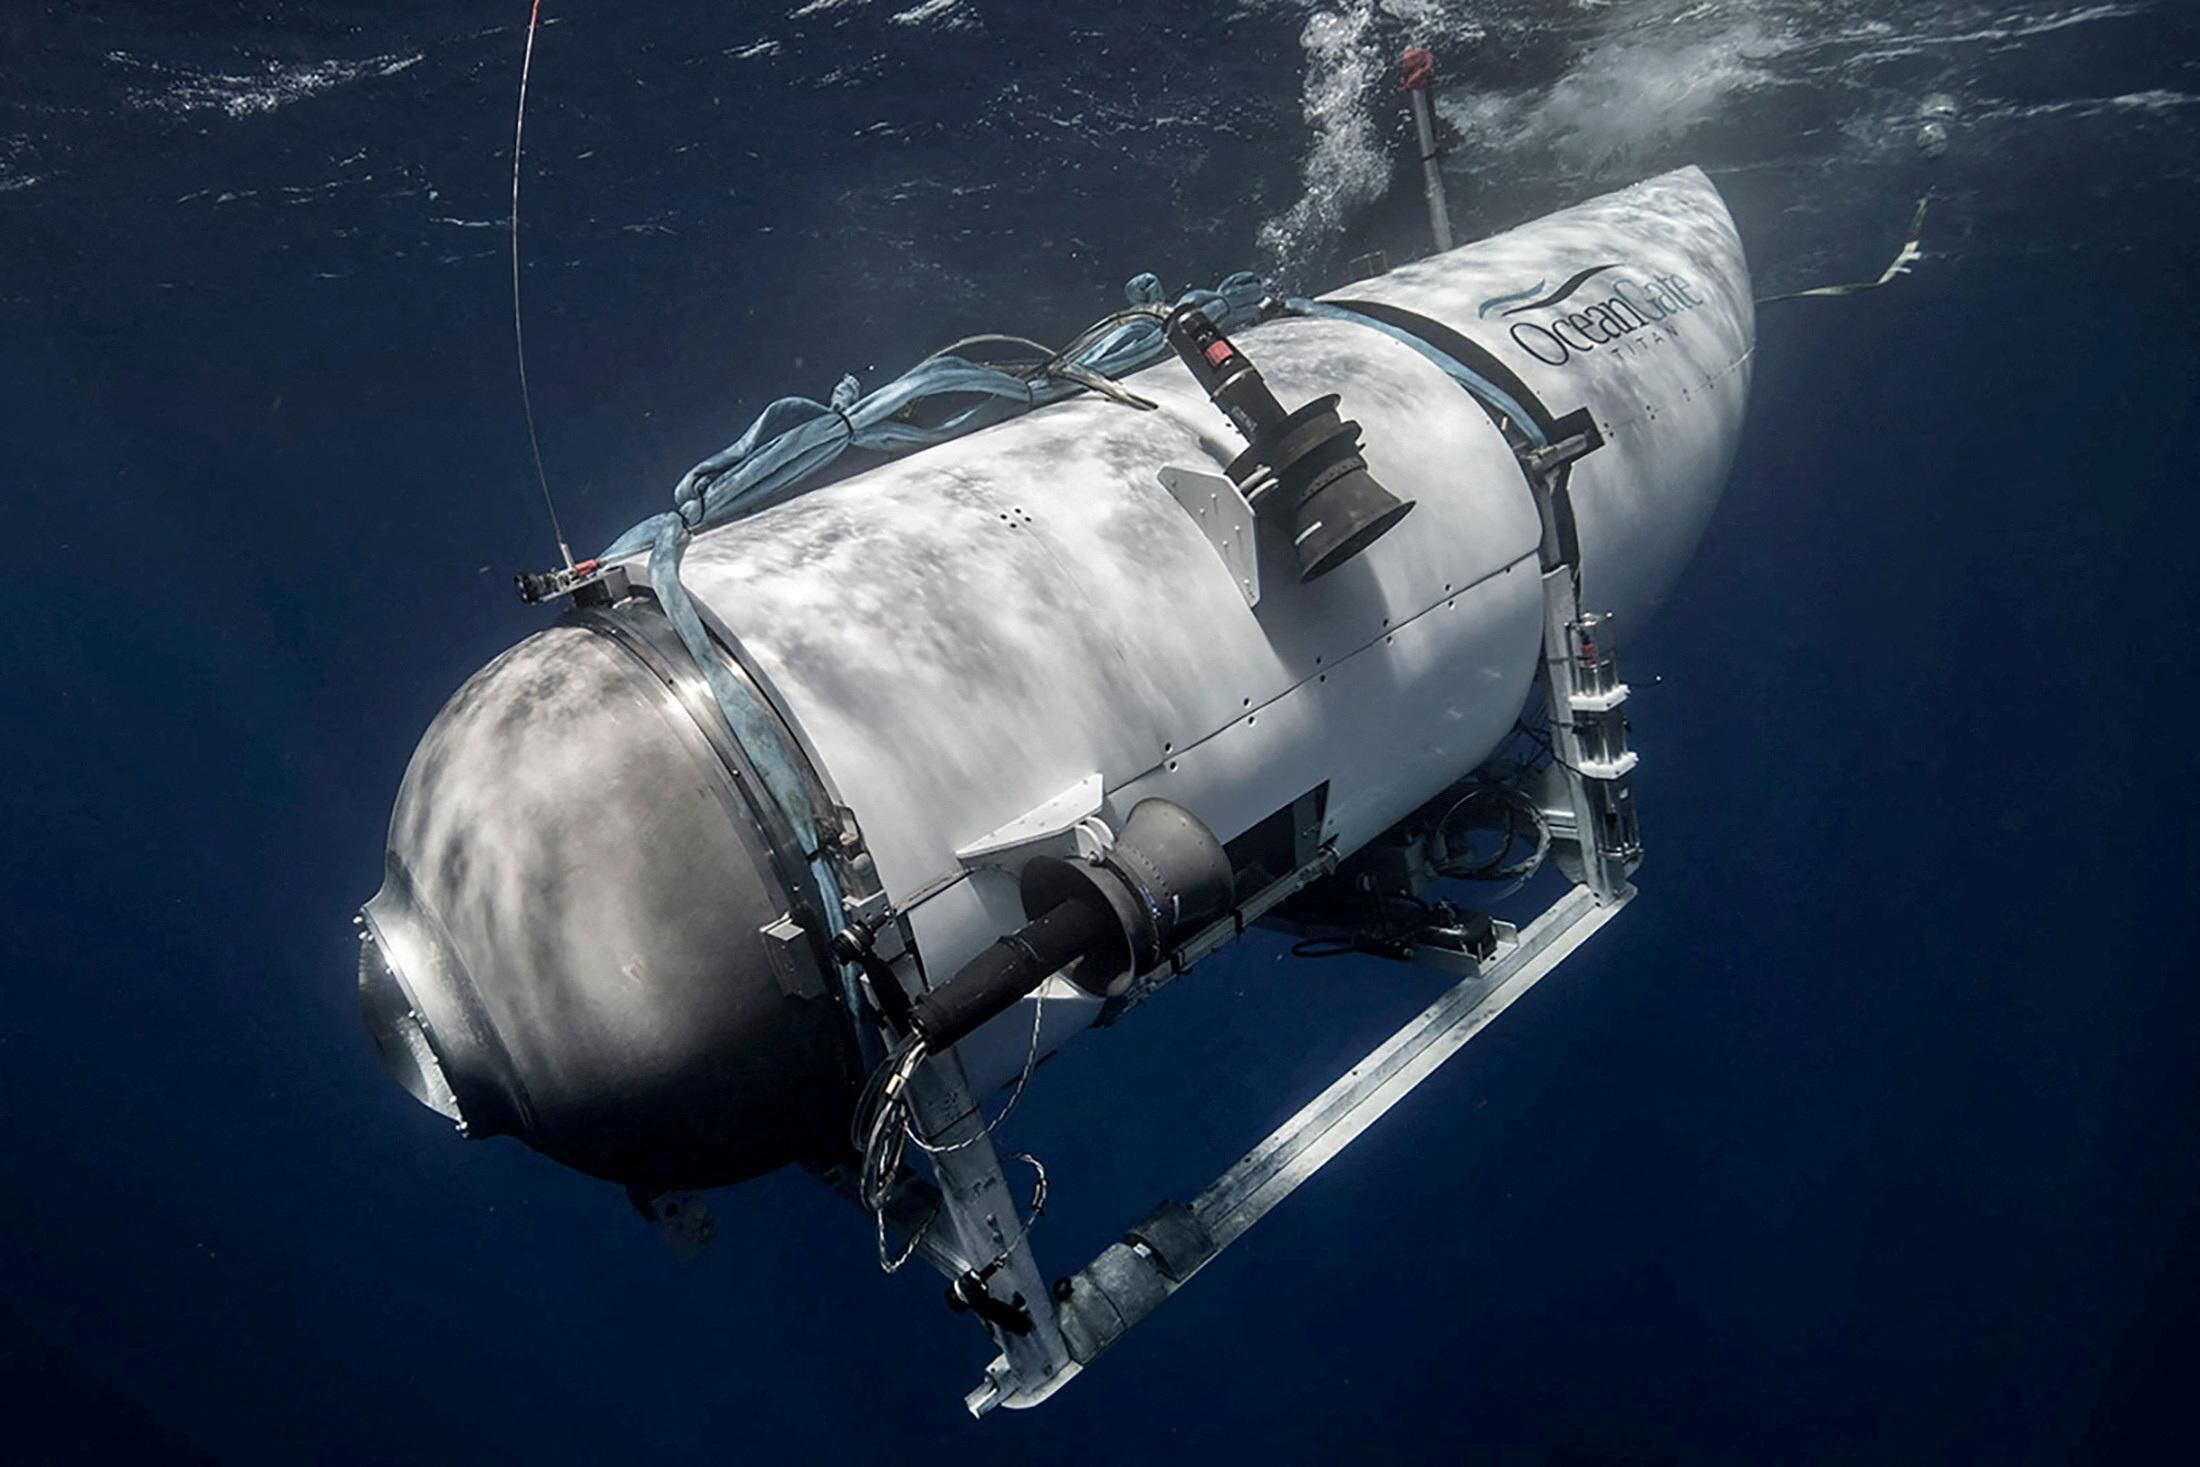 The Titan submersible began its last trip to the depths of the Atlantic Ocean on Sunday the 18th and lost communication with the surface an hour and 45 minutes later.  (REUTERS).